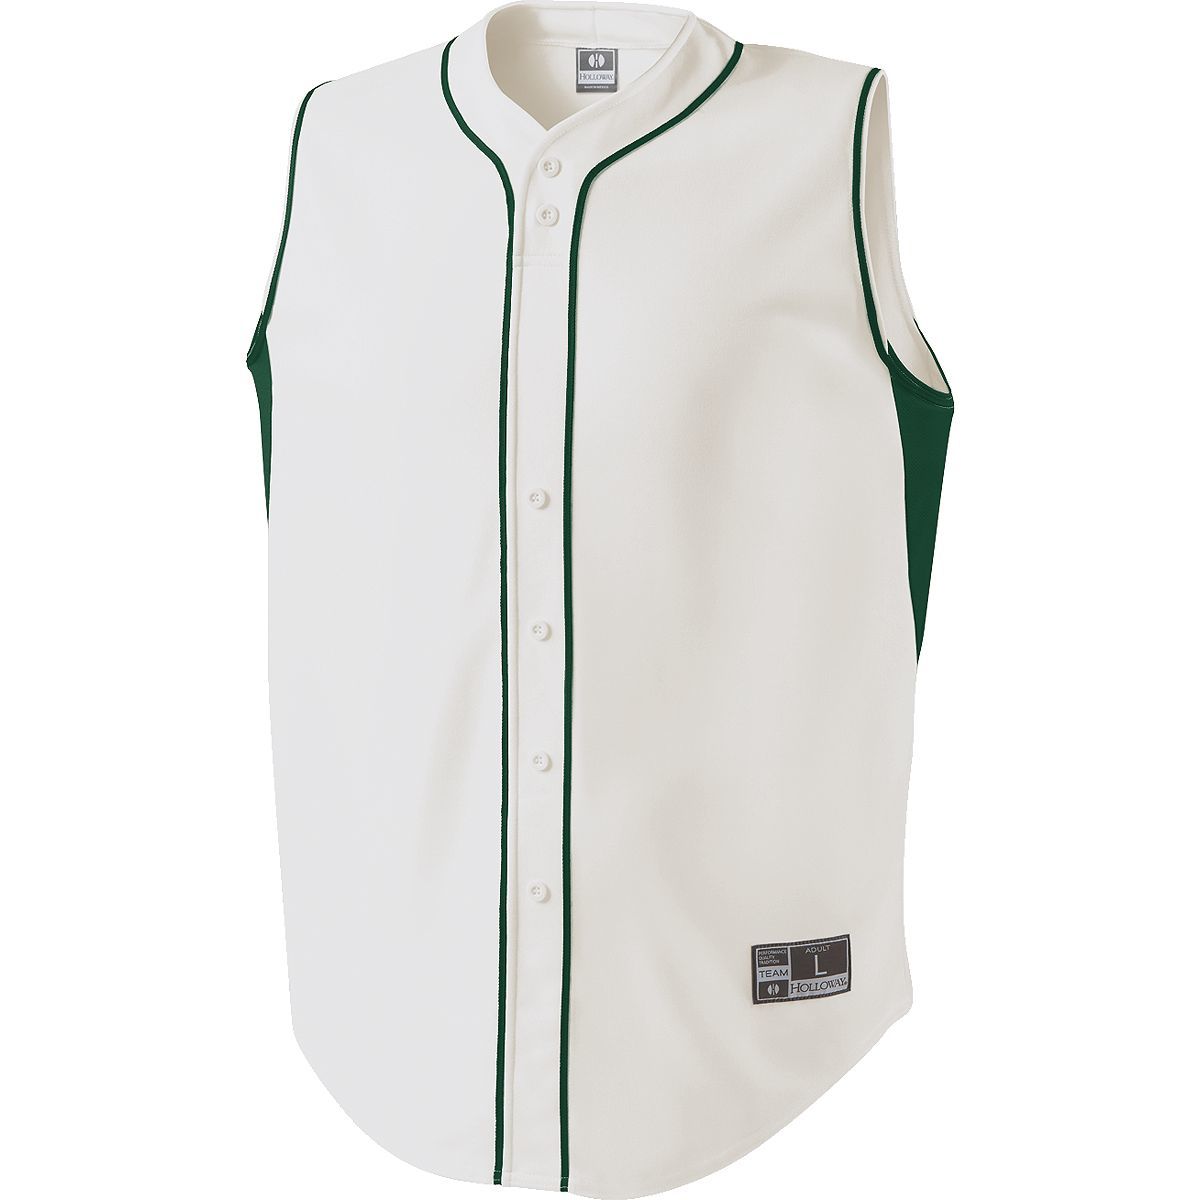 Holloway Fierce Jersey in White/Forest  -Part of the Adult, Adult-Jersey, Baseball, Holloway, Shirts, All-Sports, All-Sports-1 product lines at KanaleyCreations.com